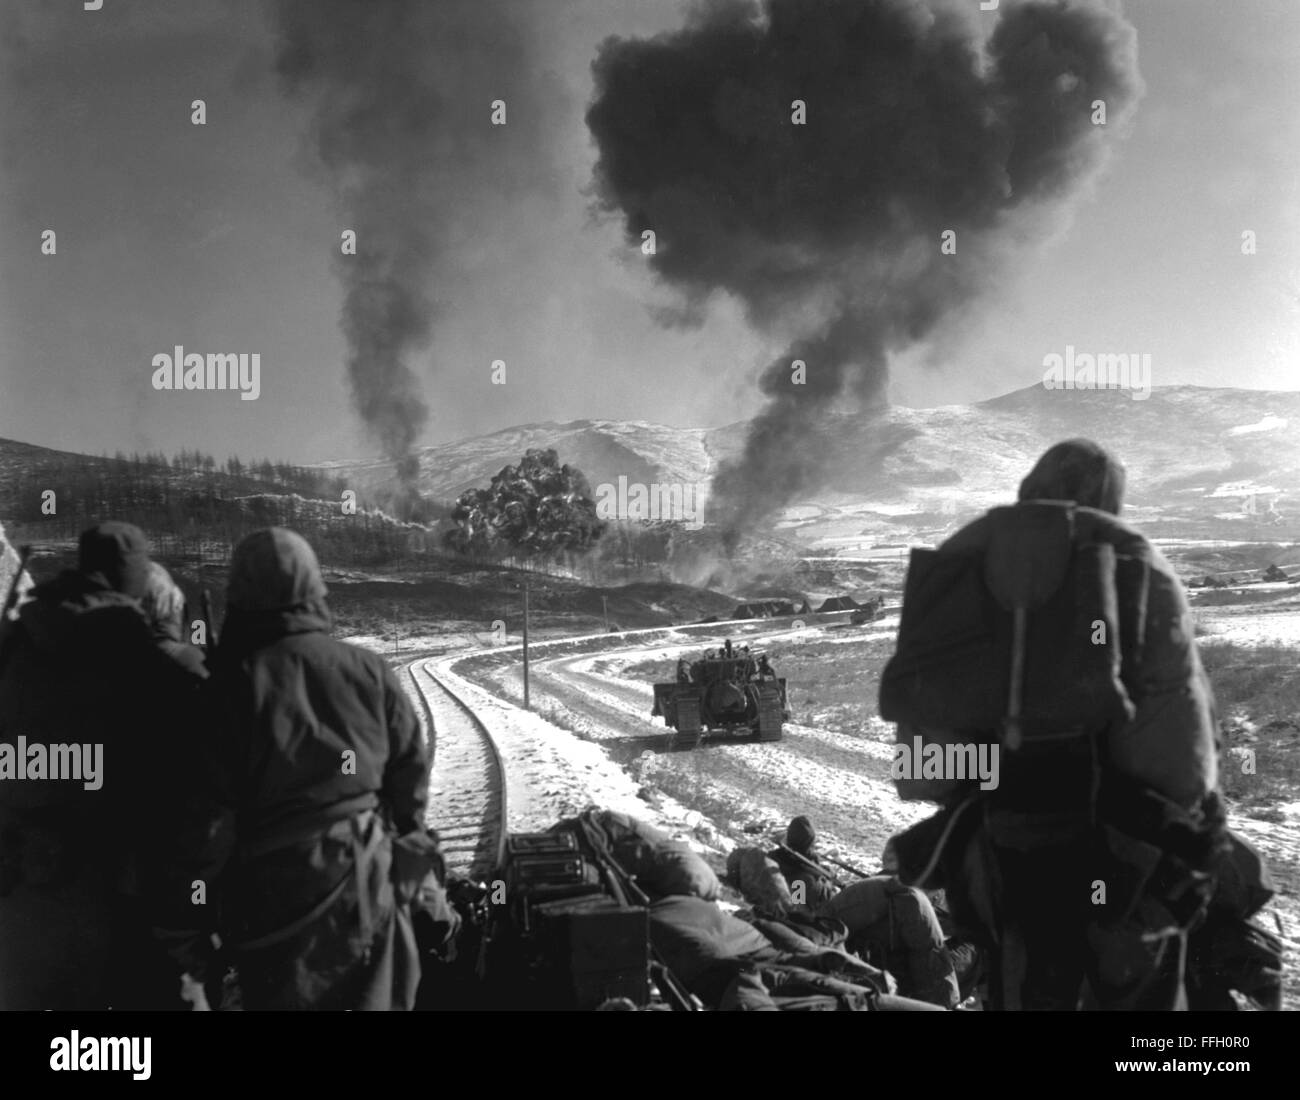 This is one of a series of three remarkable combat photographs showing the close coordination of the United States Marine air and ground units during recent fighting with Chinese Communists in Korea.  United States Marines drive forward after effective close air support of F4U-5 Corsairs.  Billows of smoke and flame from a small target area bear out the accuracy of the flying Leathernecks' Stock Photo